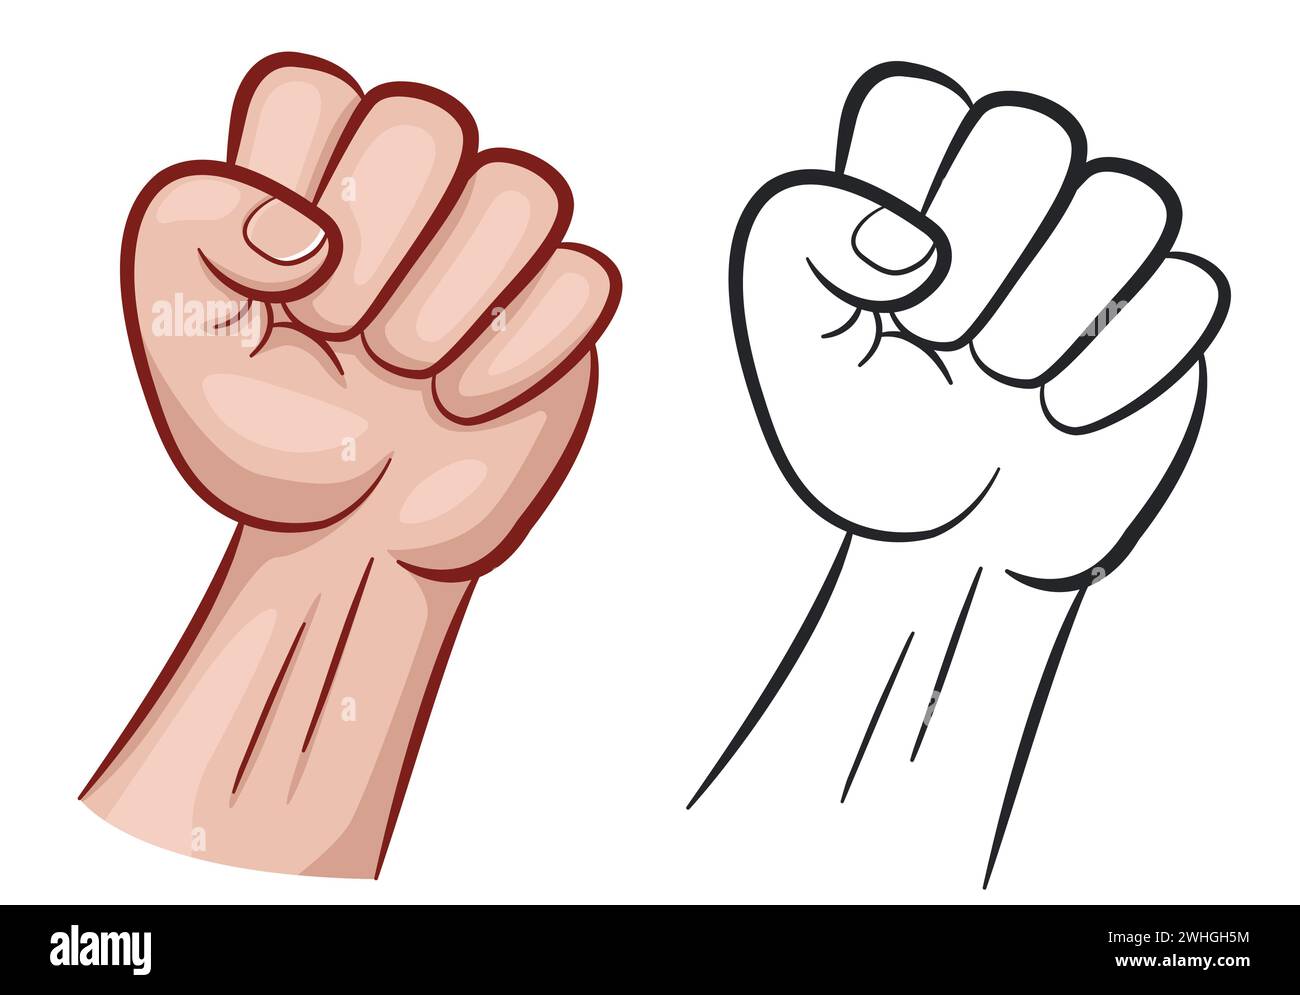 Illustration of fist clenched on white background Stock Vector